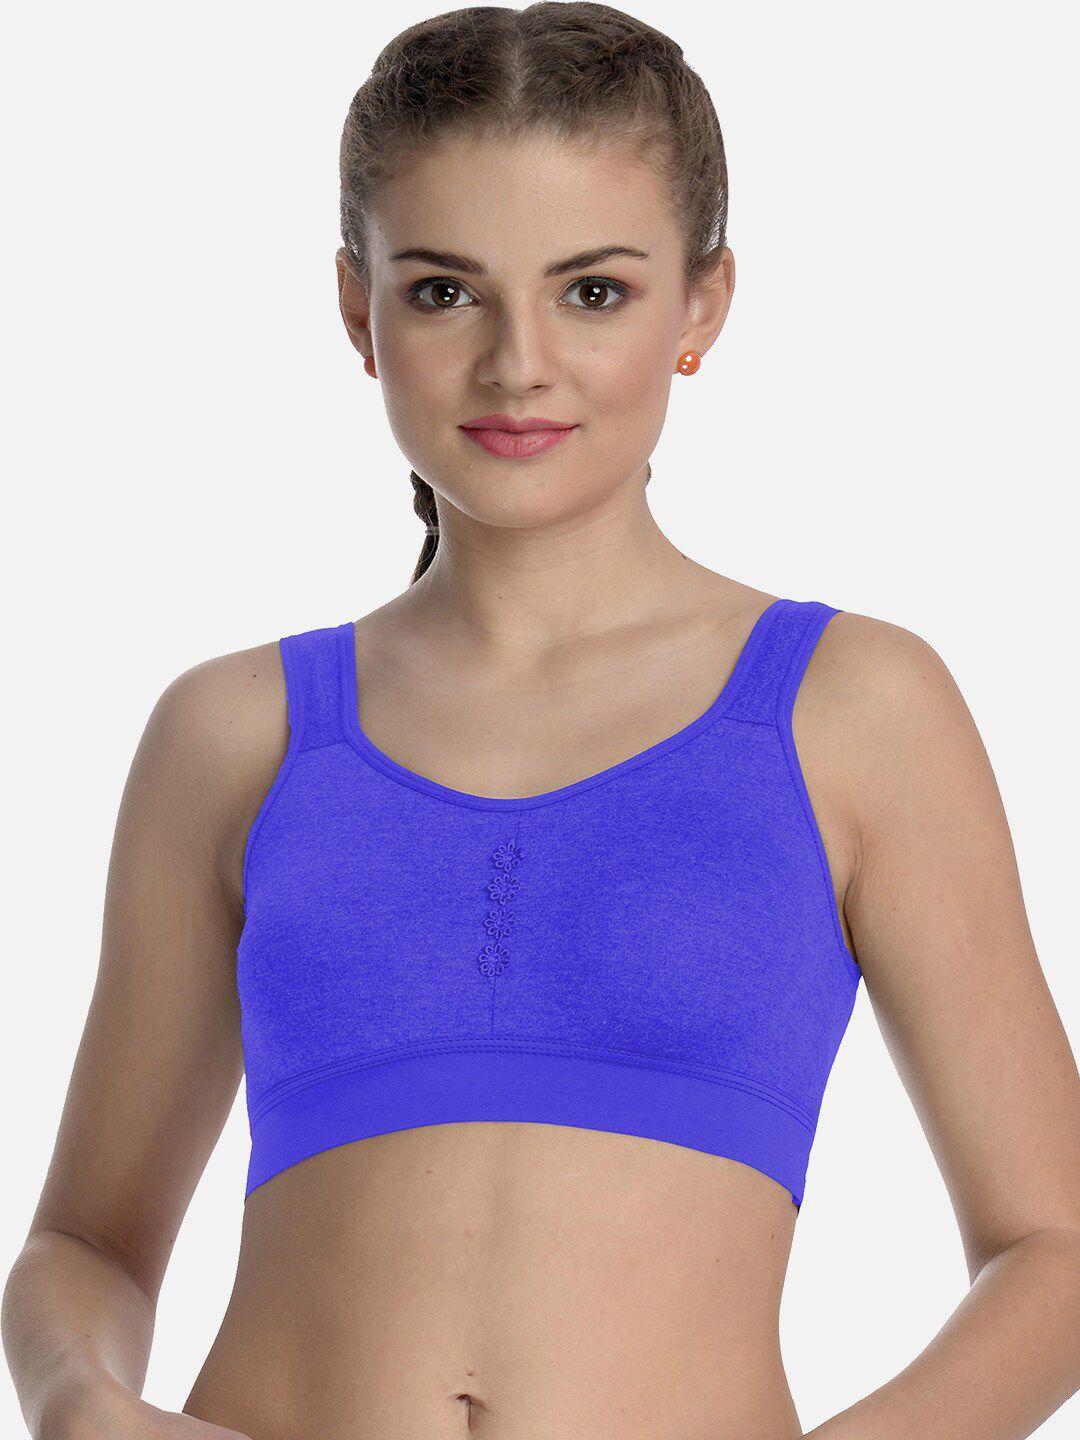 fims-dry-fit-non-padded-full-coverage-cotton-sports-bra